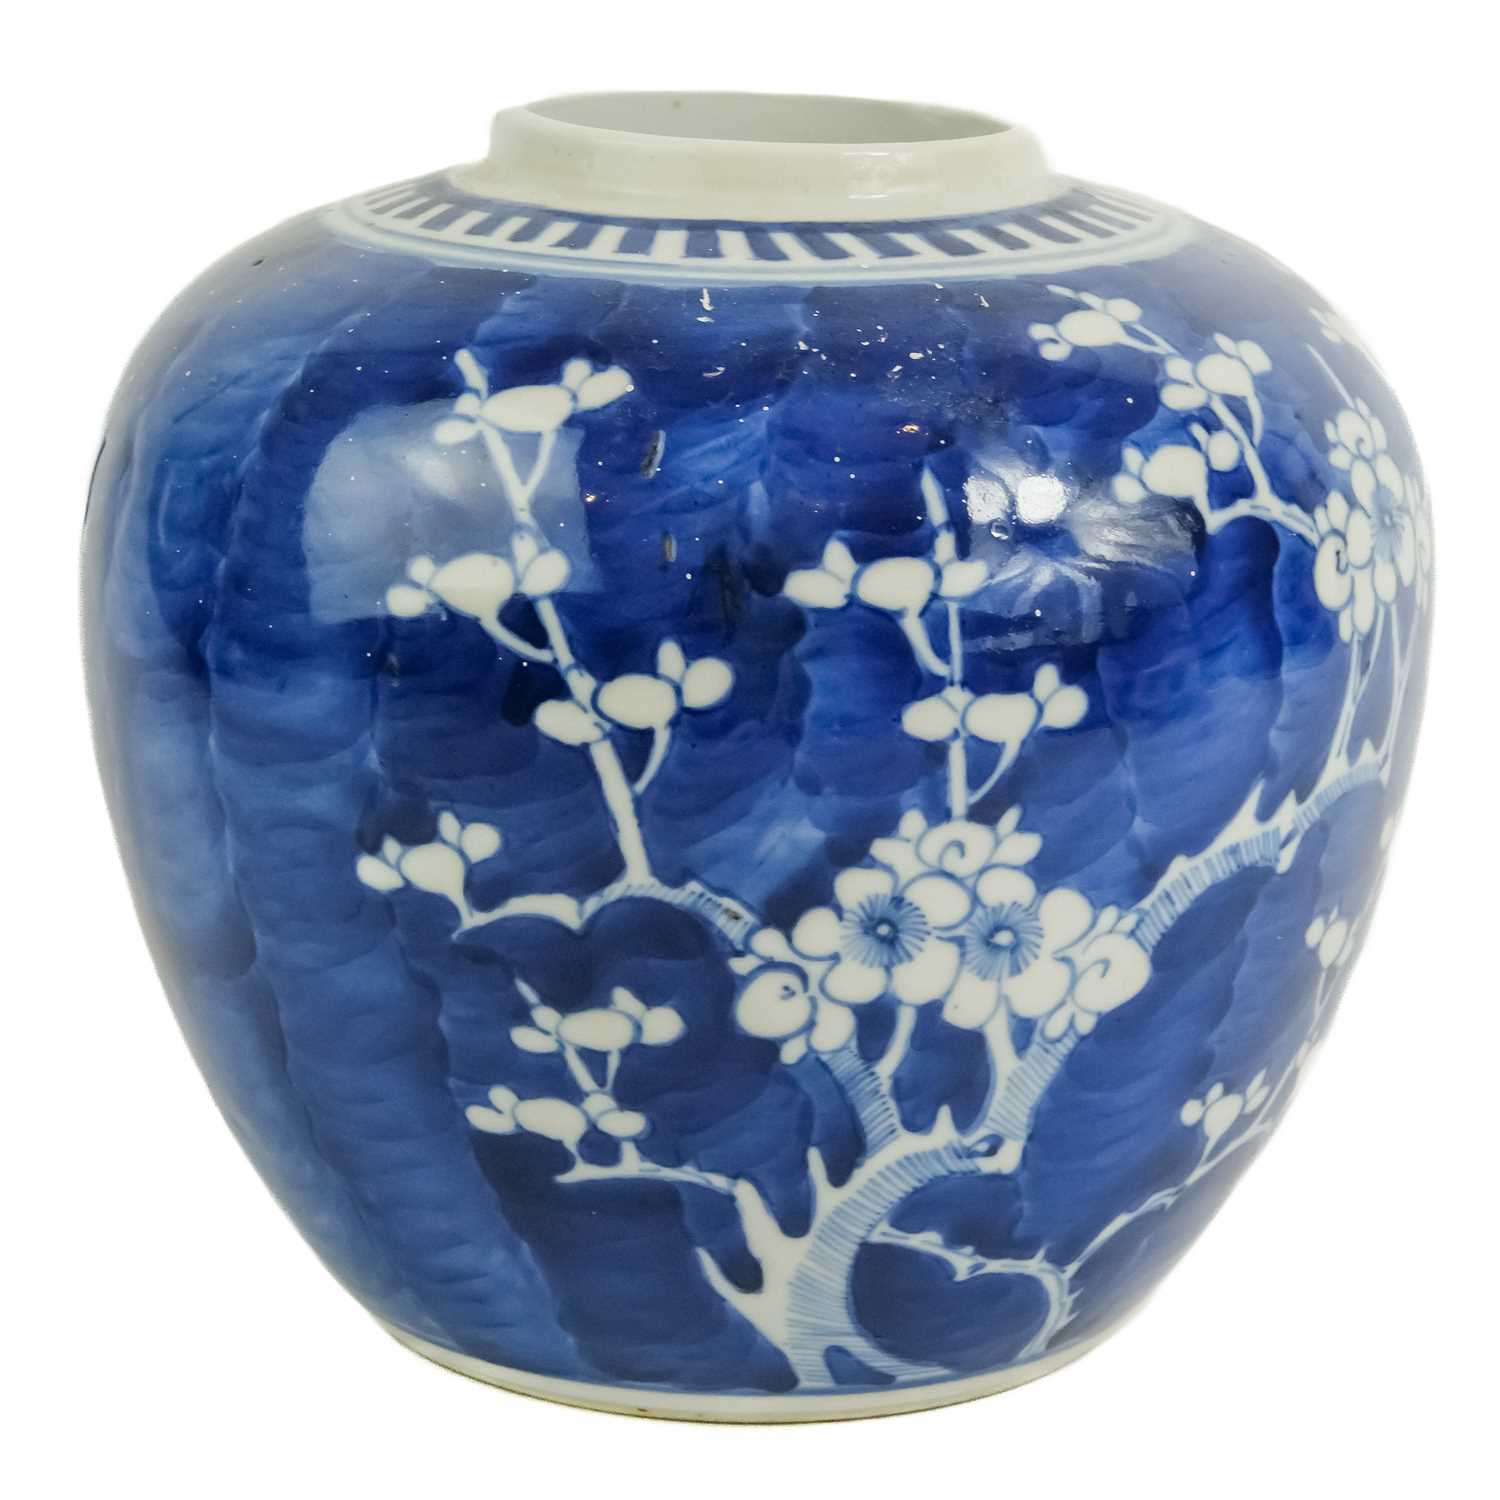 Two Chinese blue and white prunus blossom pattern ginger jars, late 19th century. - Image 3 of 10